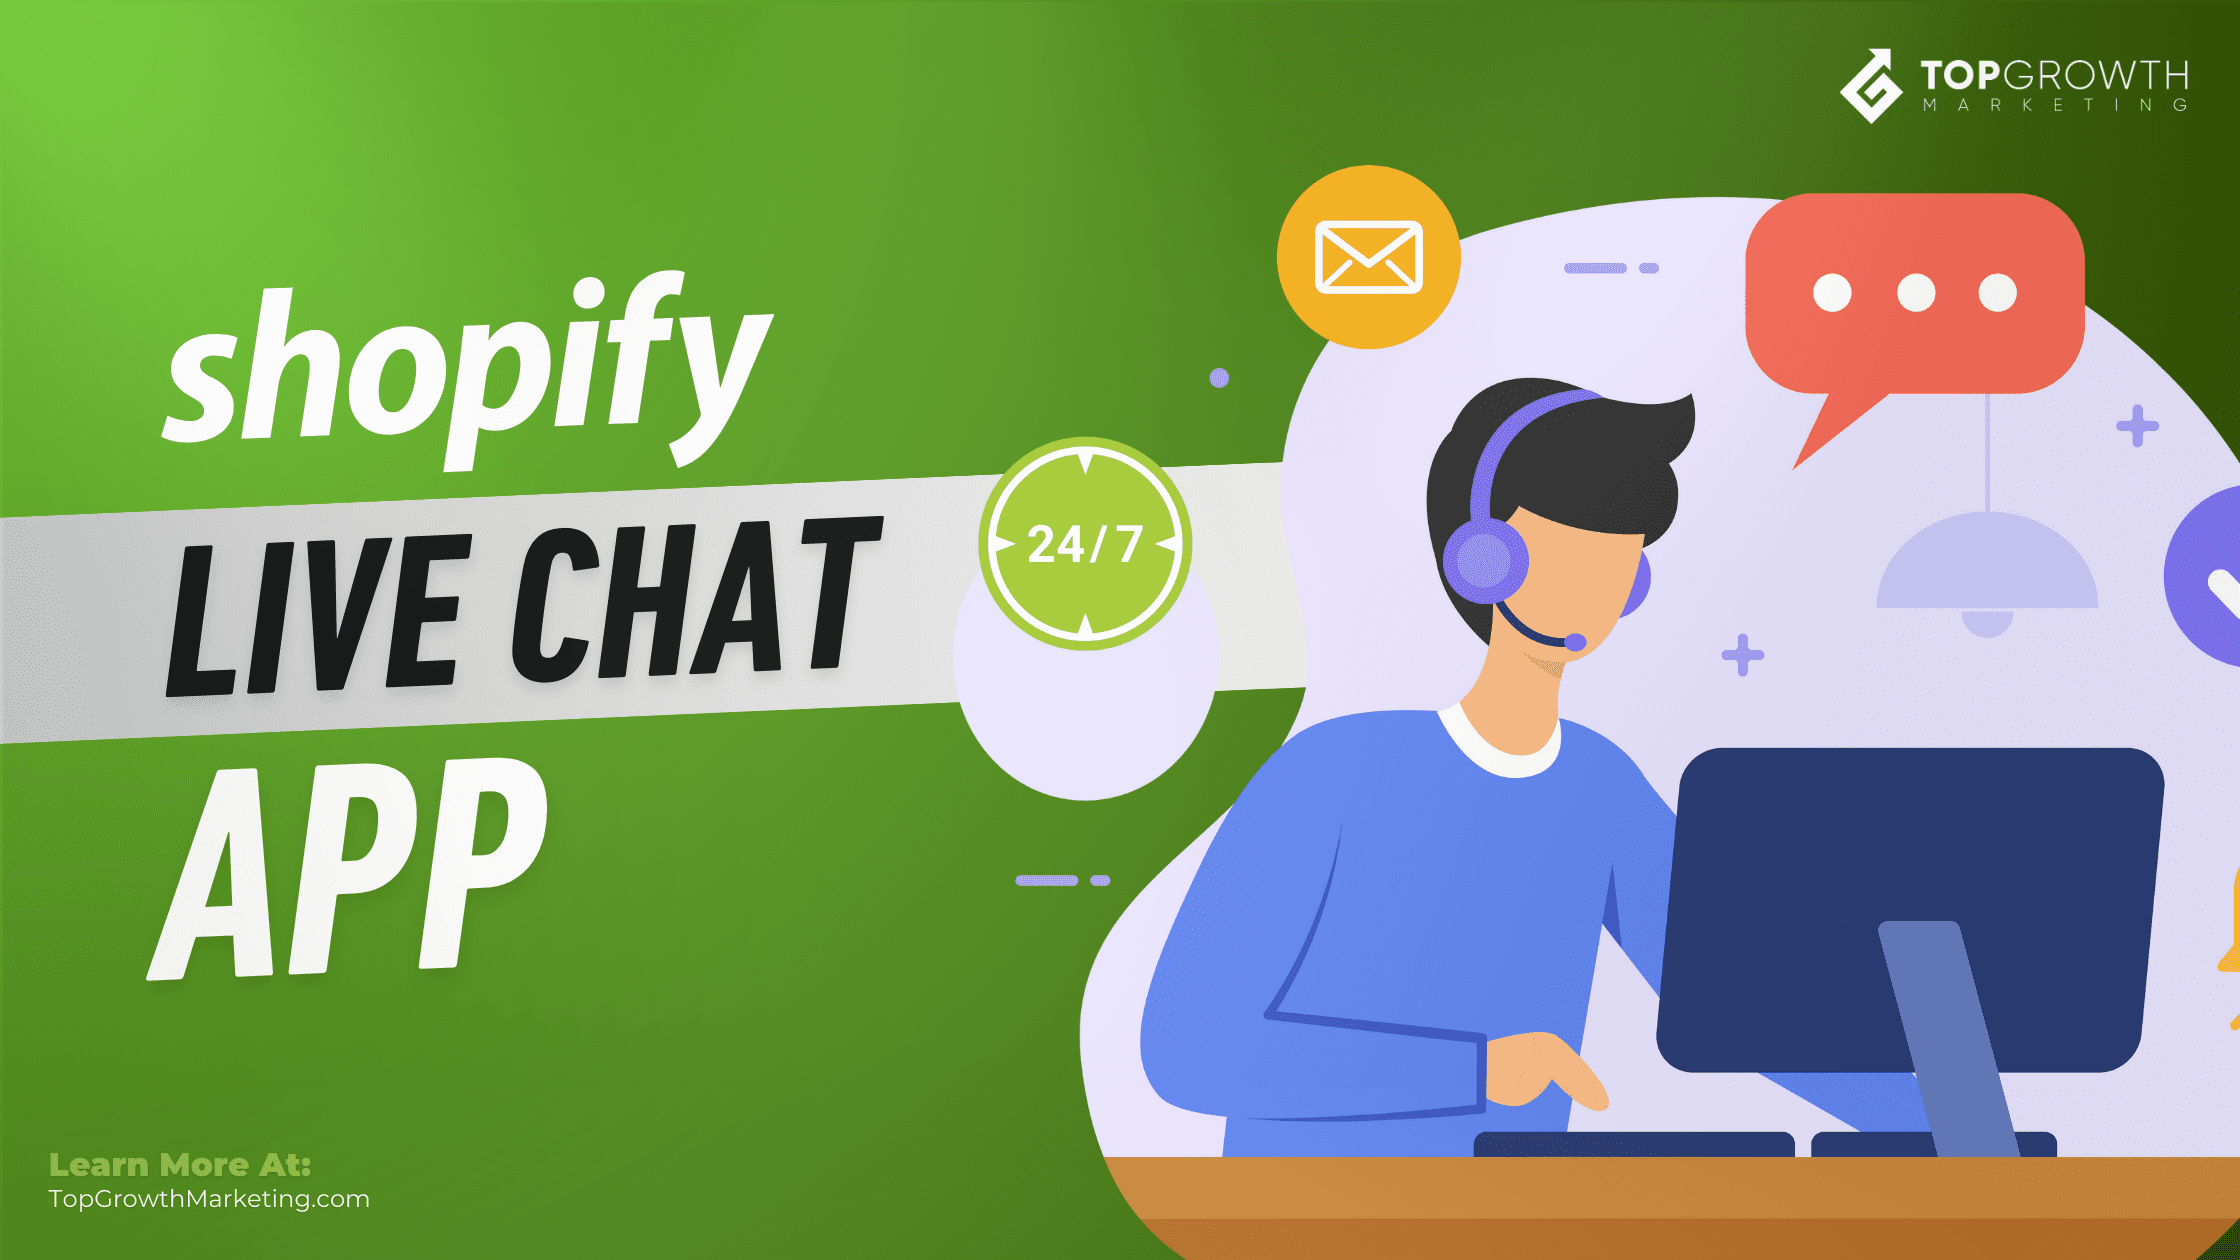 Shopify Live Chat apps